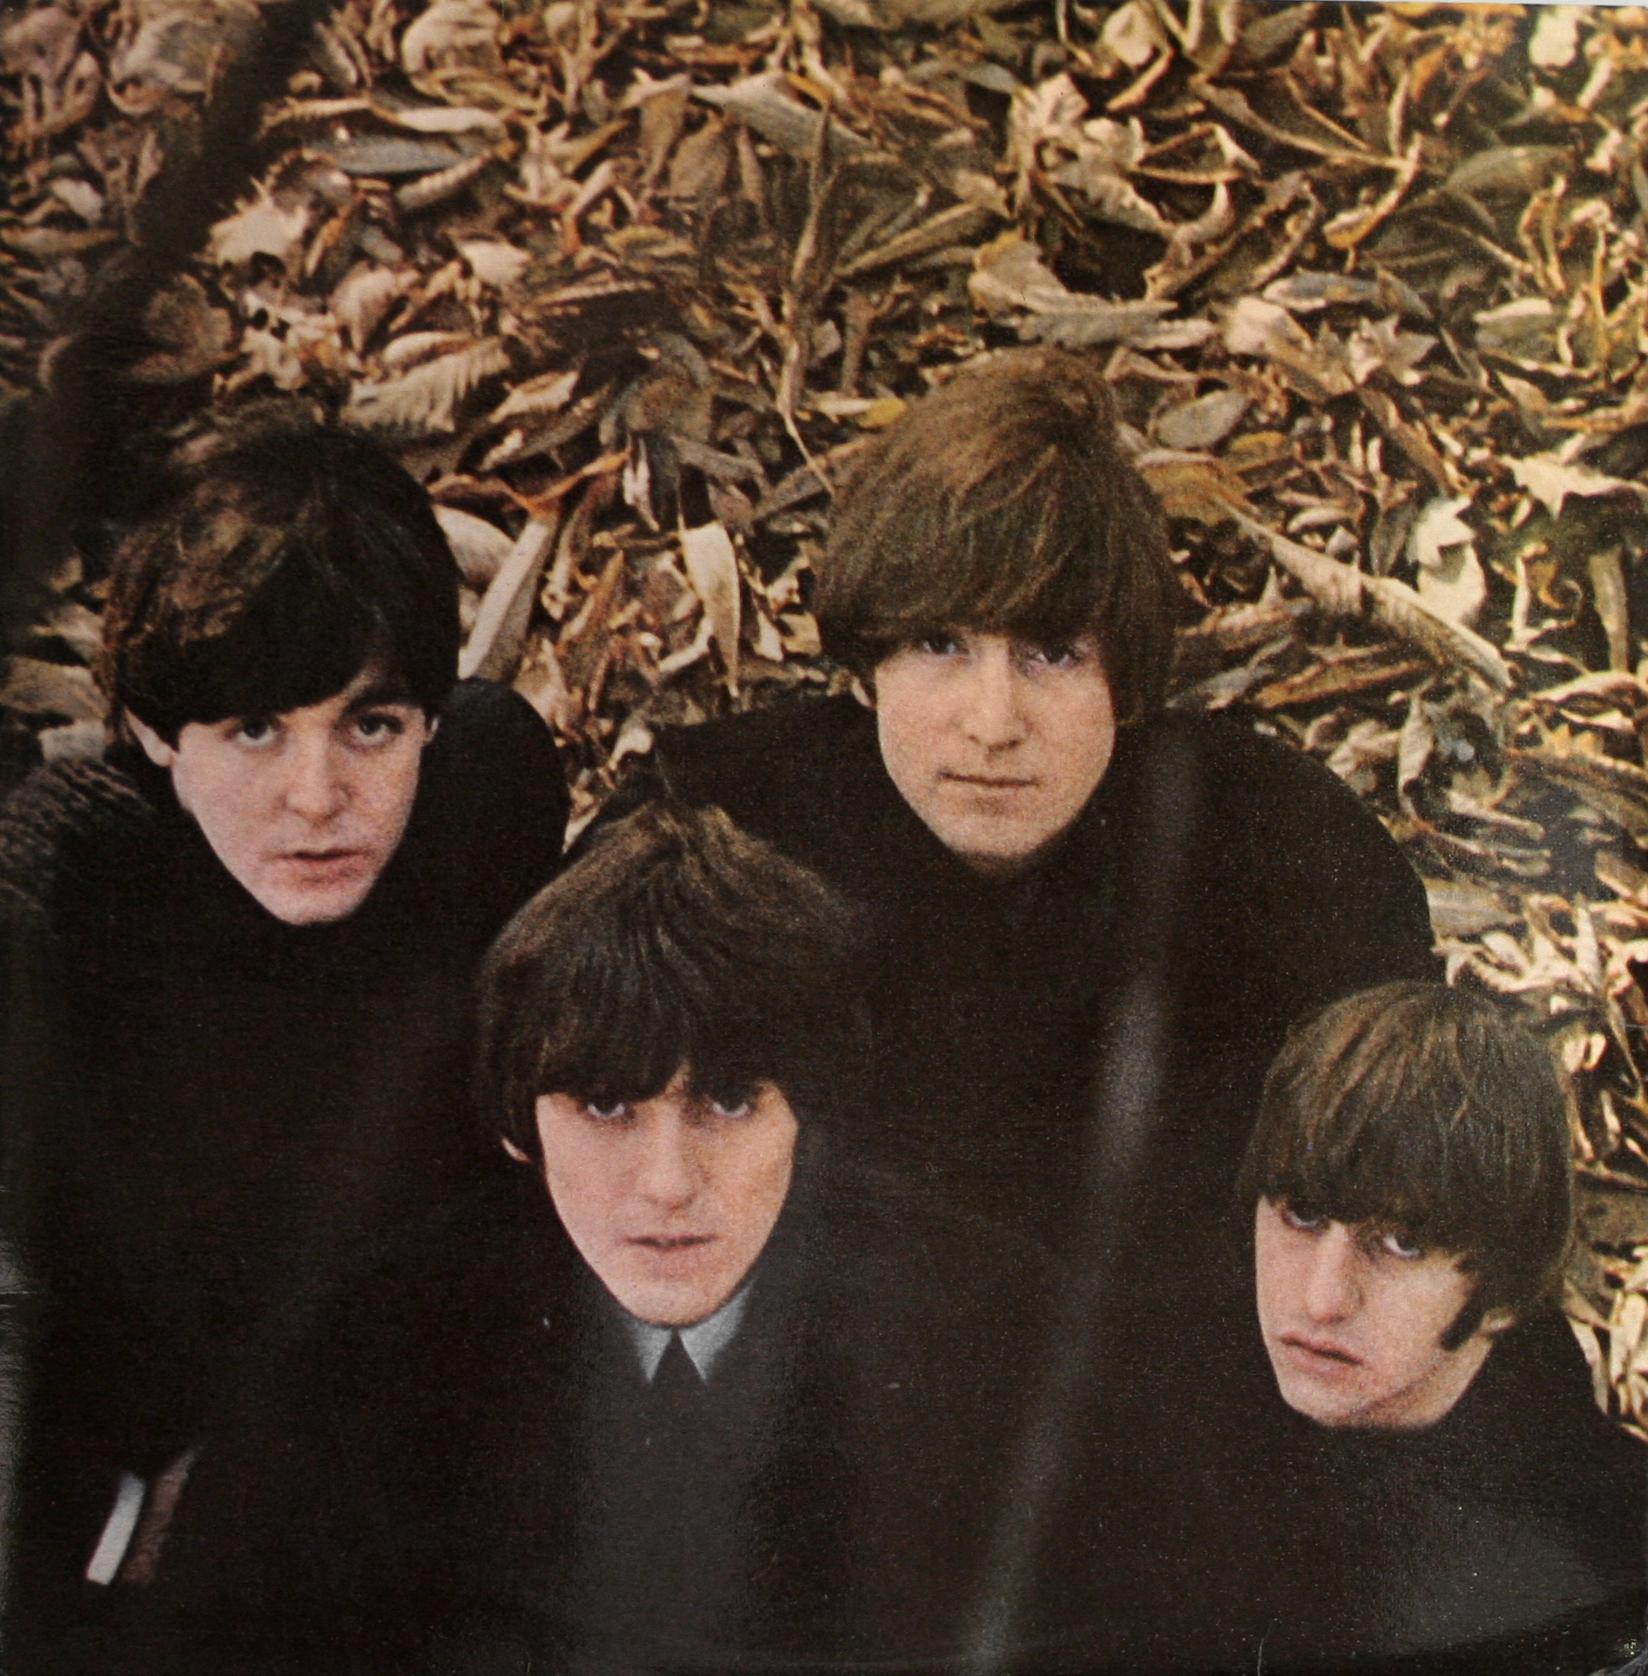 The Beatles Collection » Beatles For Sale, Parlophone, PCS 3062.